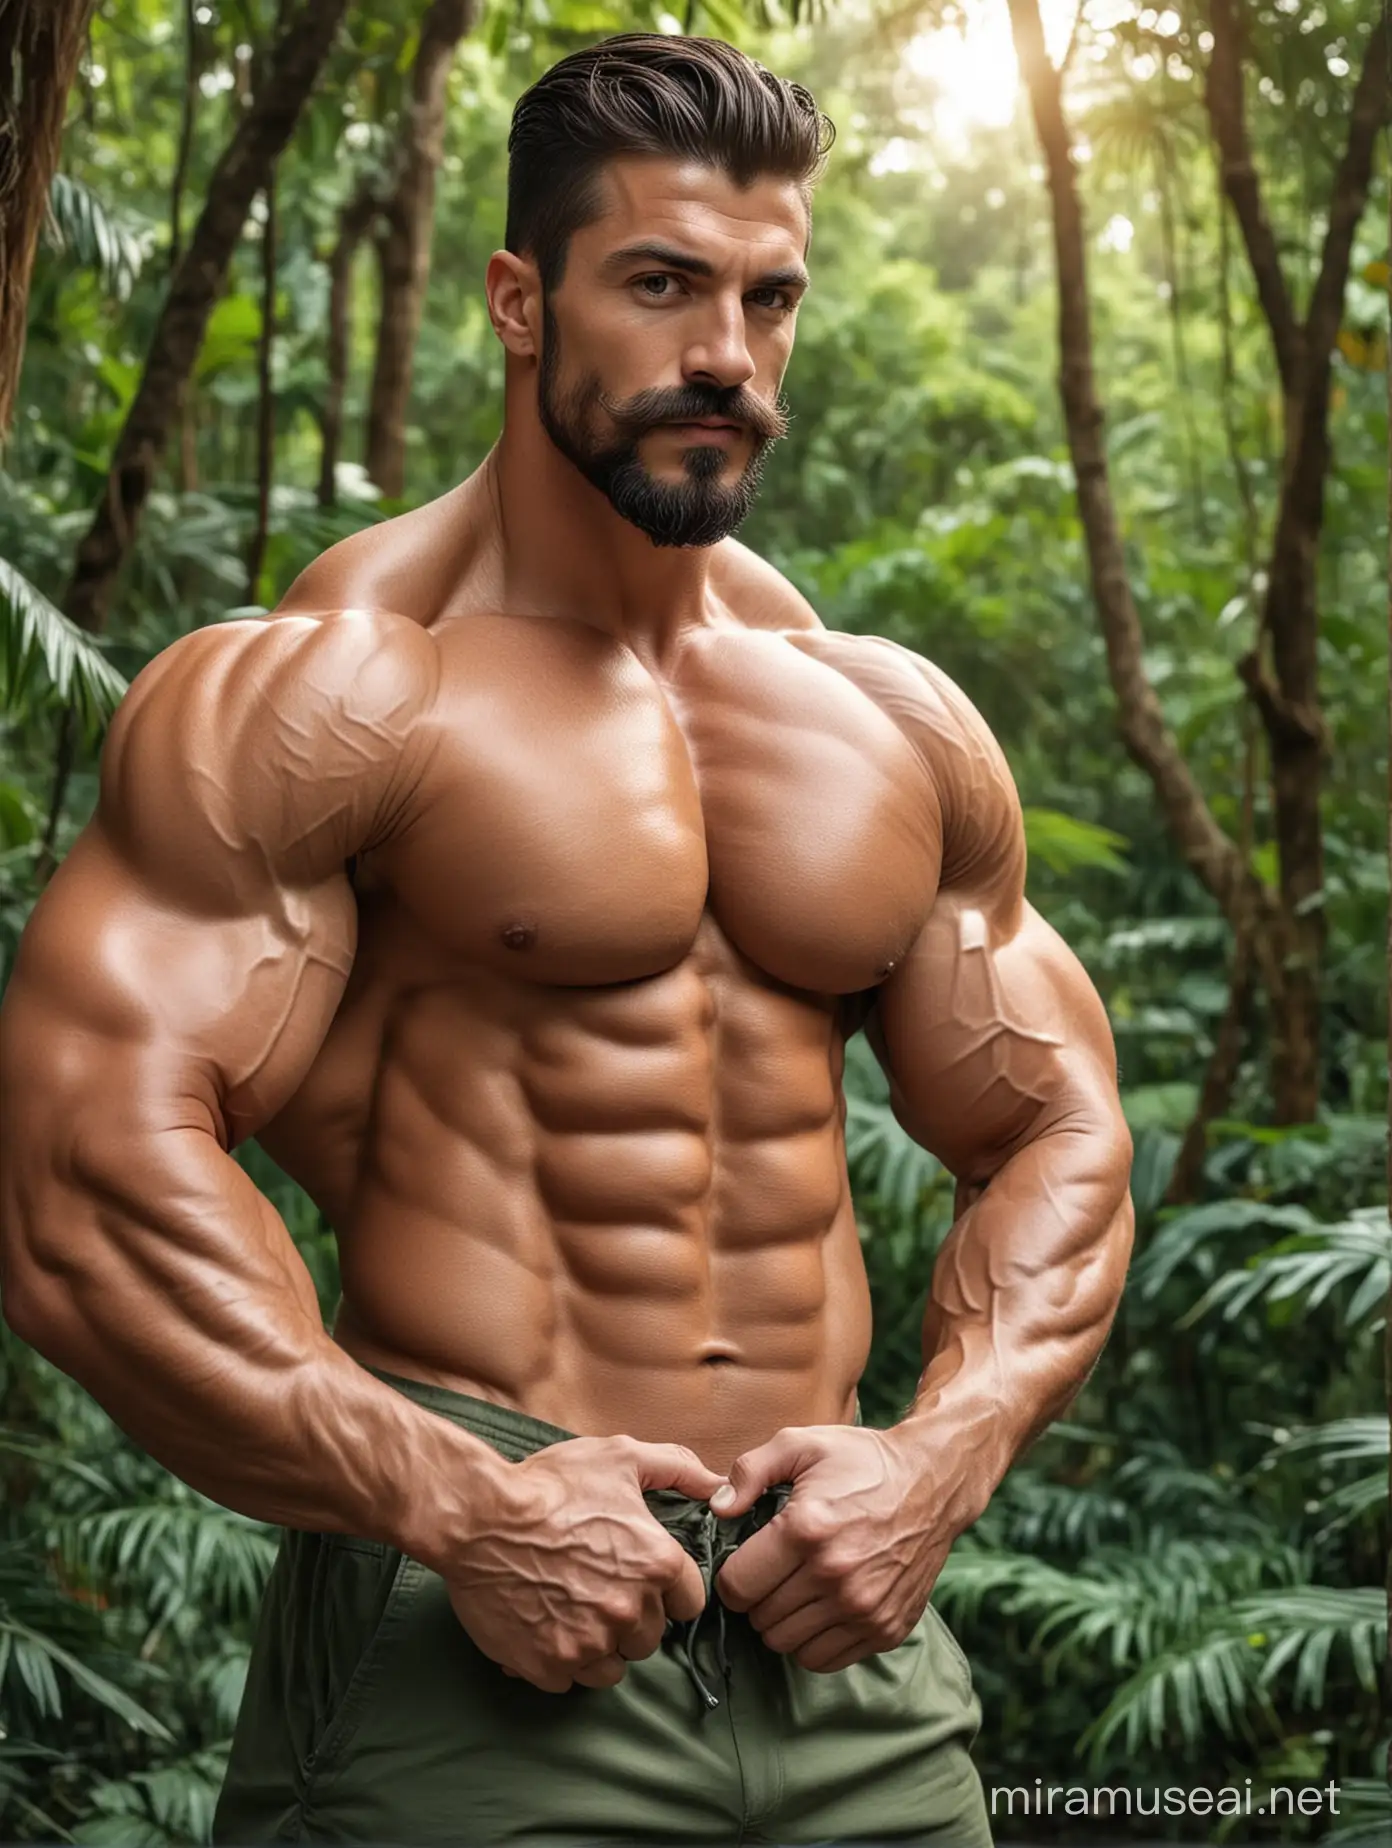 Handsome Bodybuilder Flexing Muscles in Lush Jungle Setting